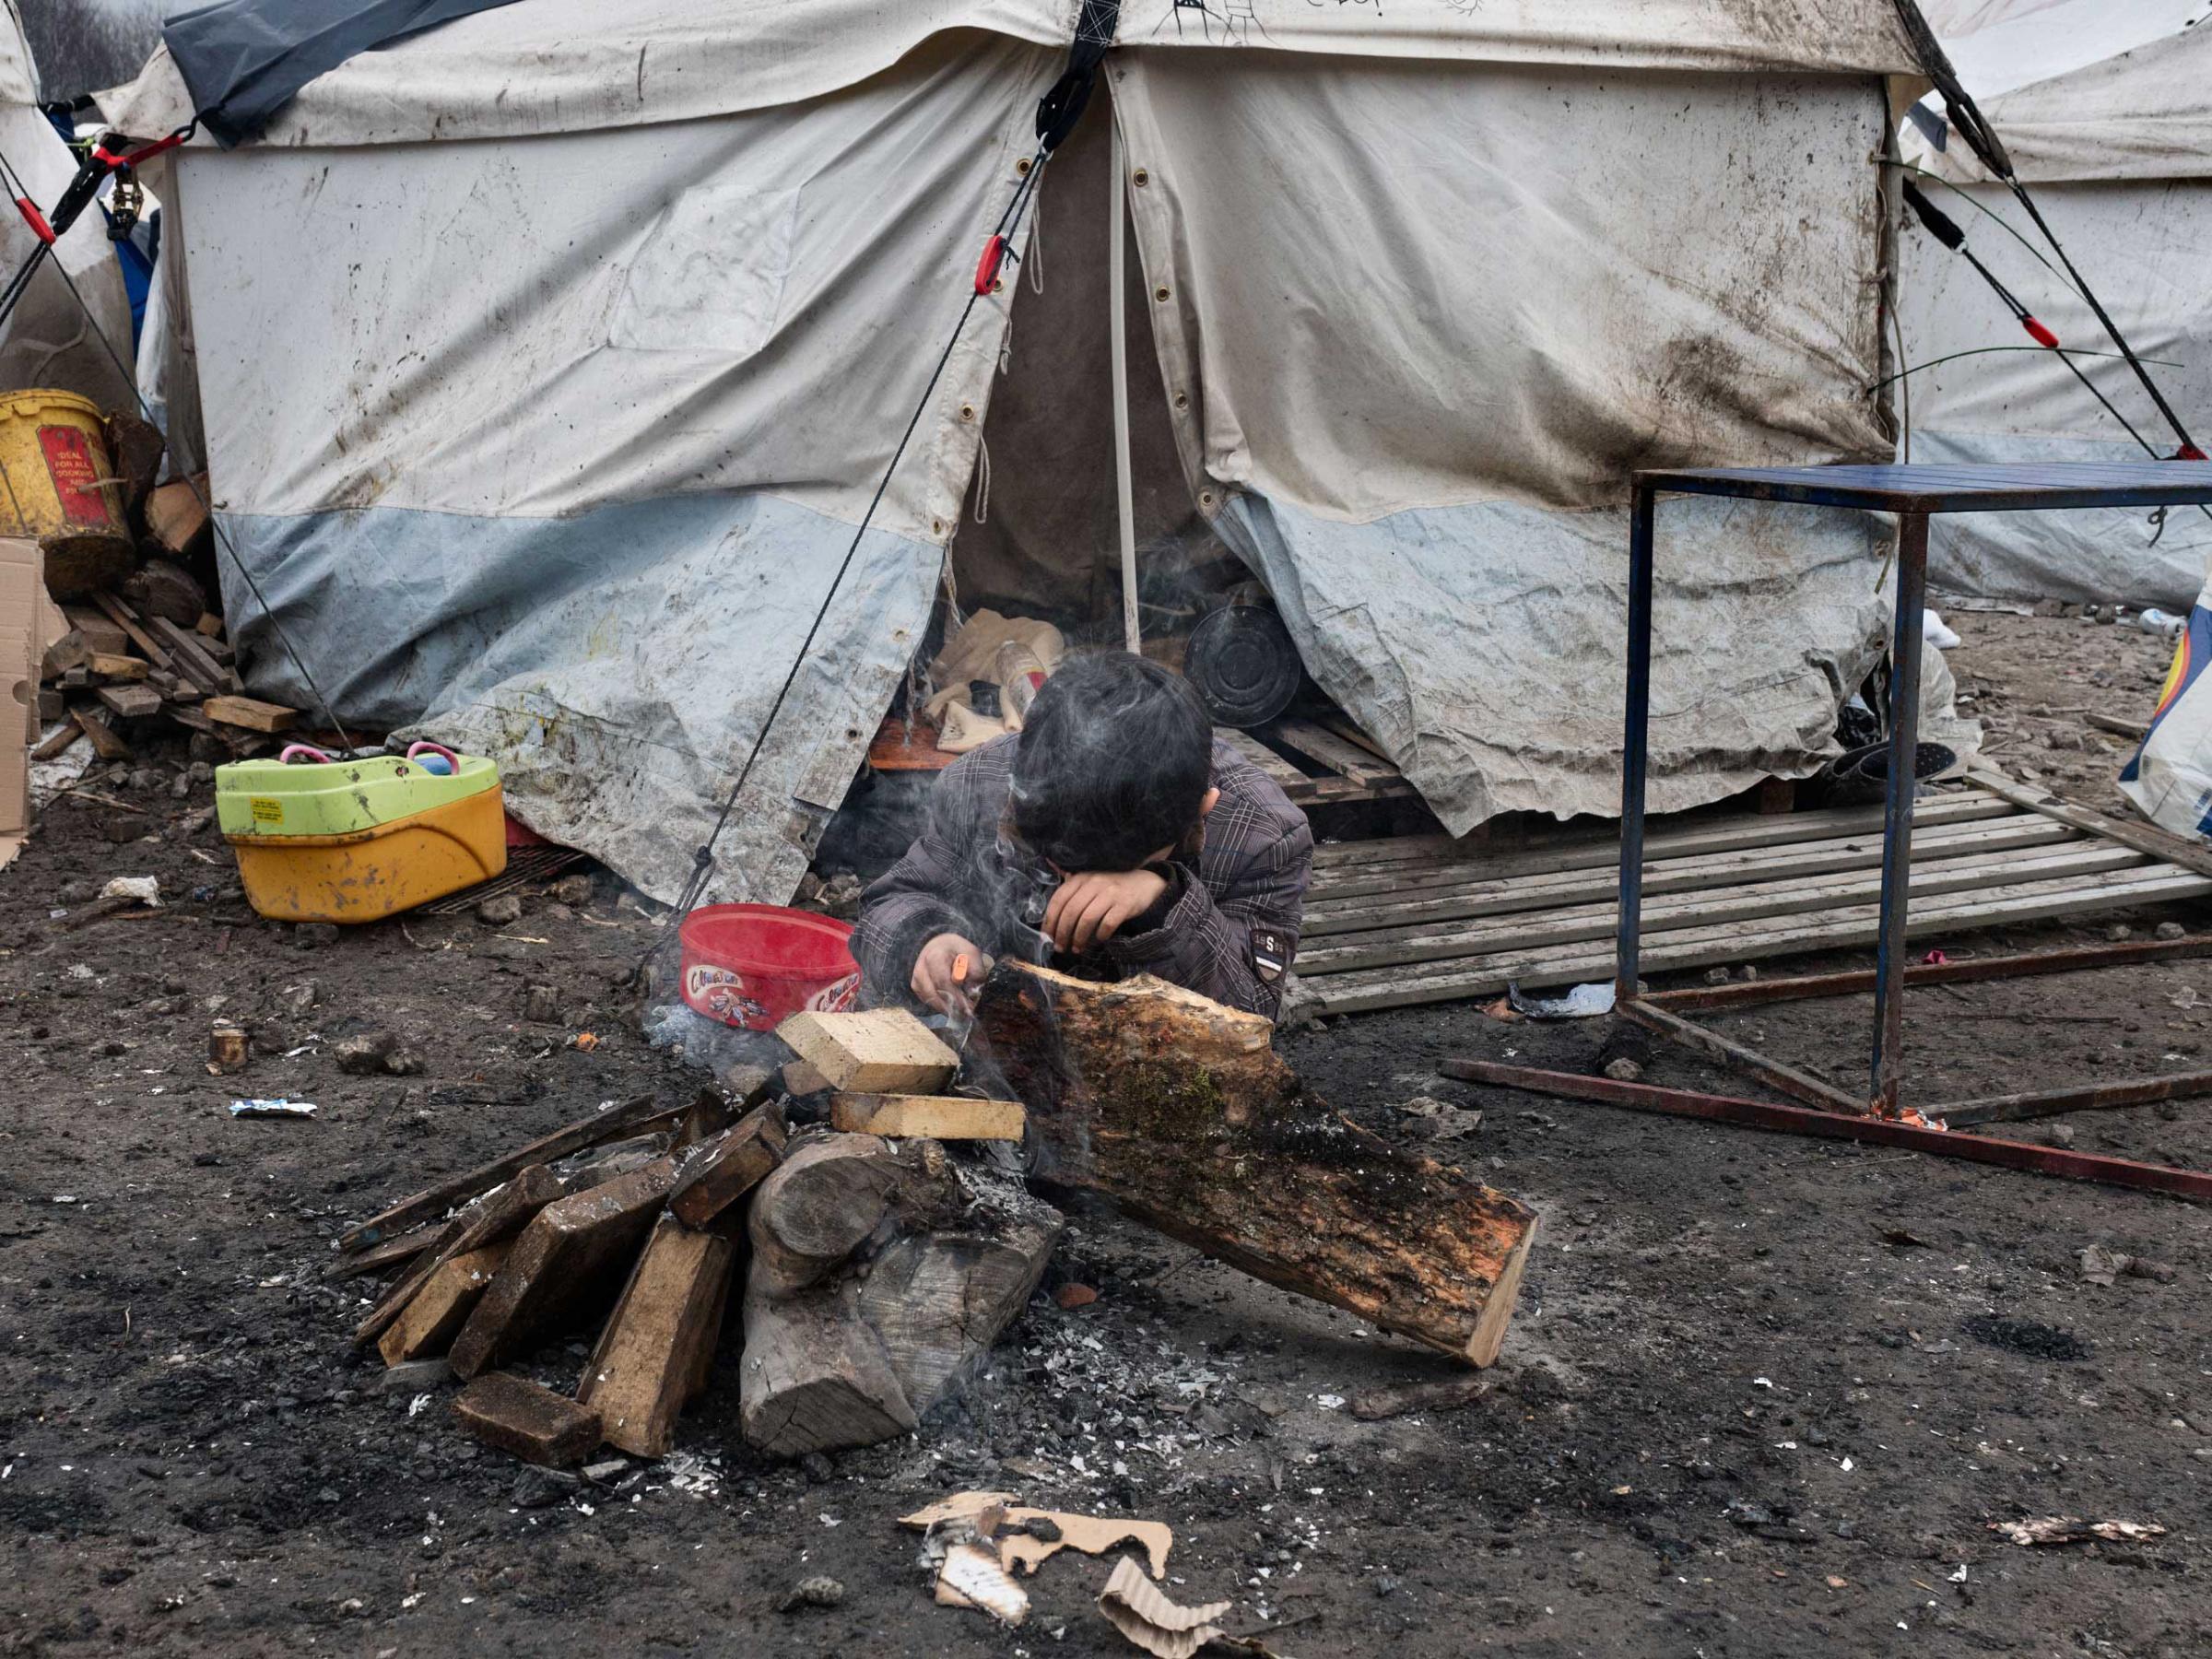 The refugee camp near Dunkirk, Grande-Synthe, which is accommodating over 2,500 refugees mostly families from Kurdistan, January 20, 2016